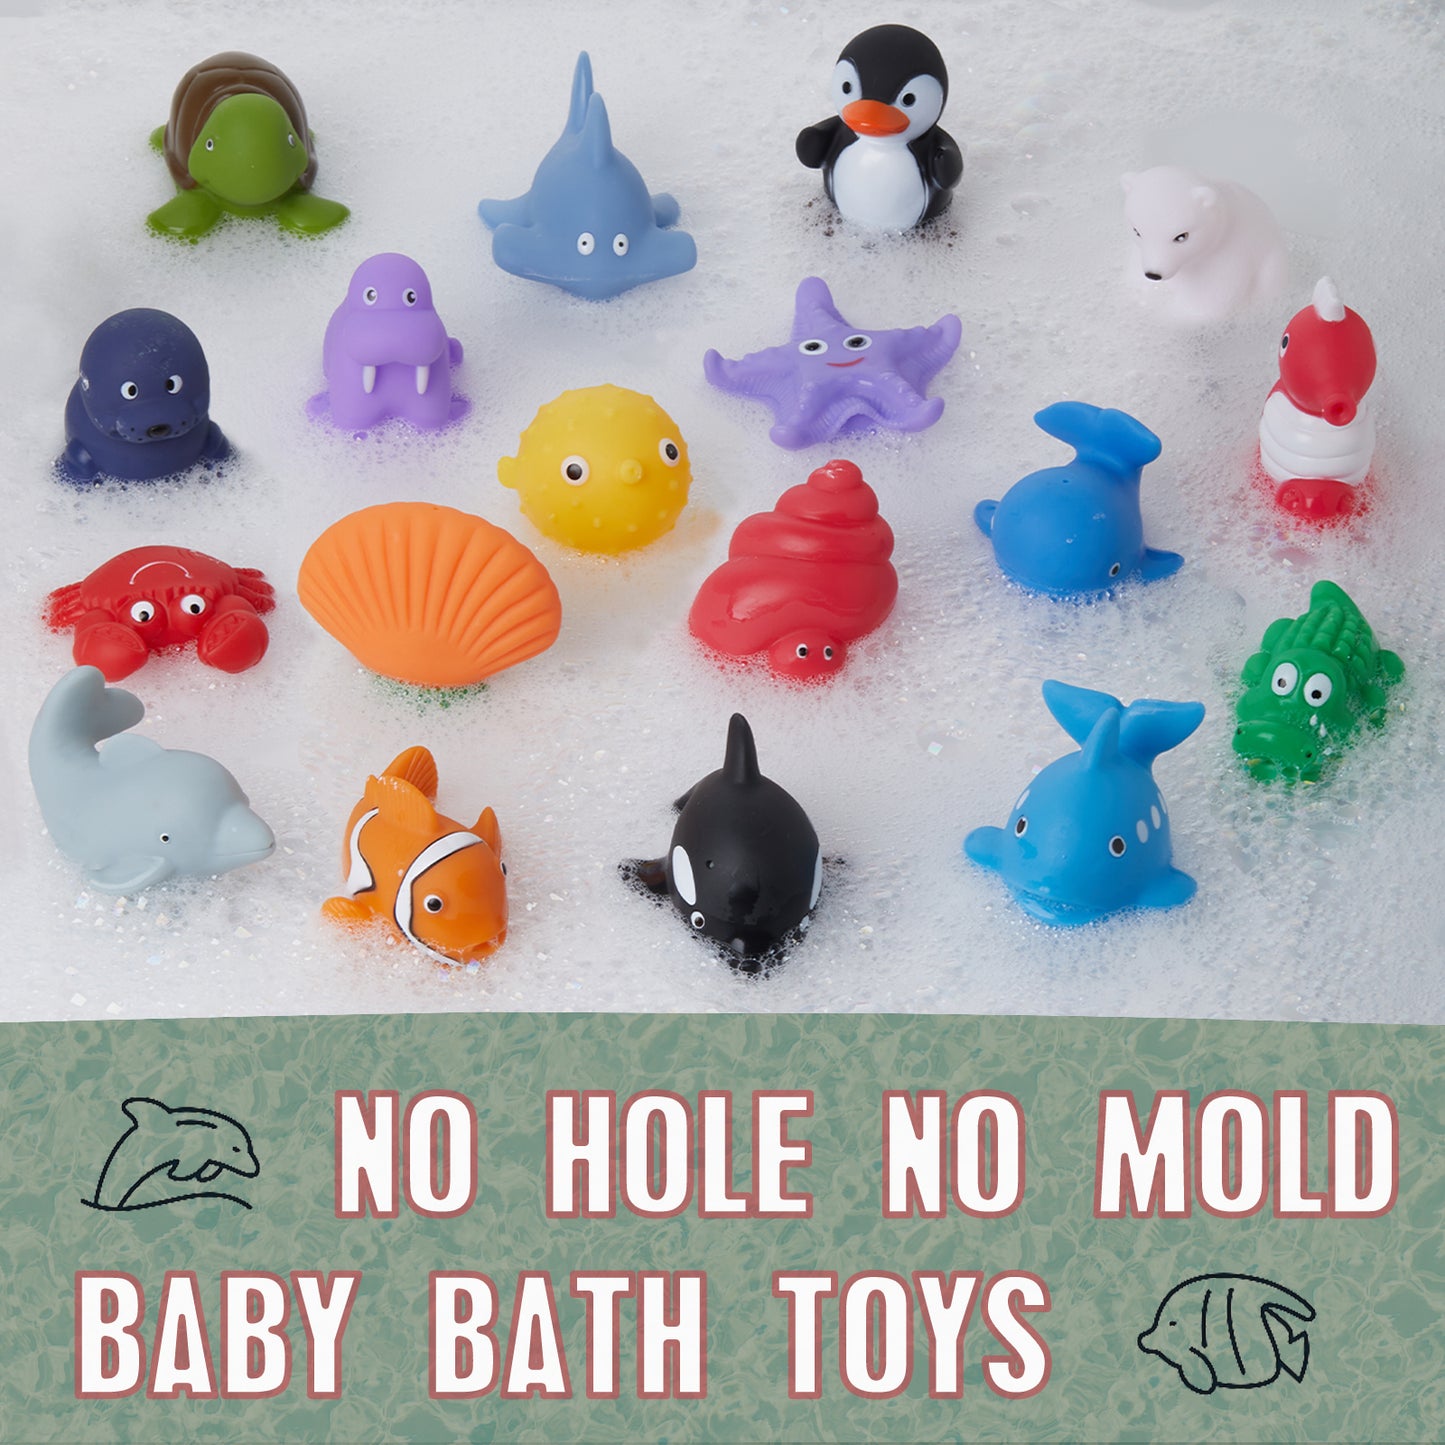 Mold Free Bath Toys 18 Pcs for Toddlers/ Infants 6 - 12- 18 Months, No Hole Baby Bathtub Toys, 1 2 3 4 Years Old Kids (18 Pcs Ocean Animals with Mesh Bag) Visit the XY-WQ Store